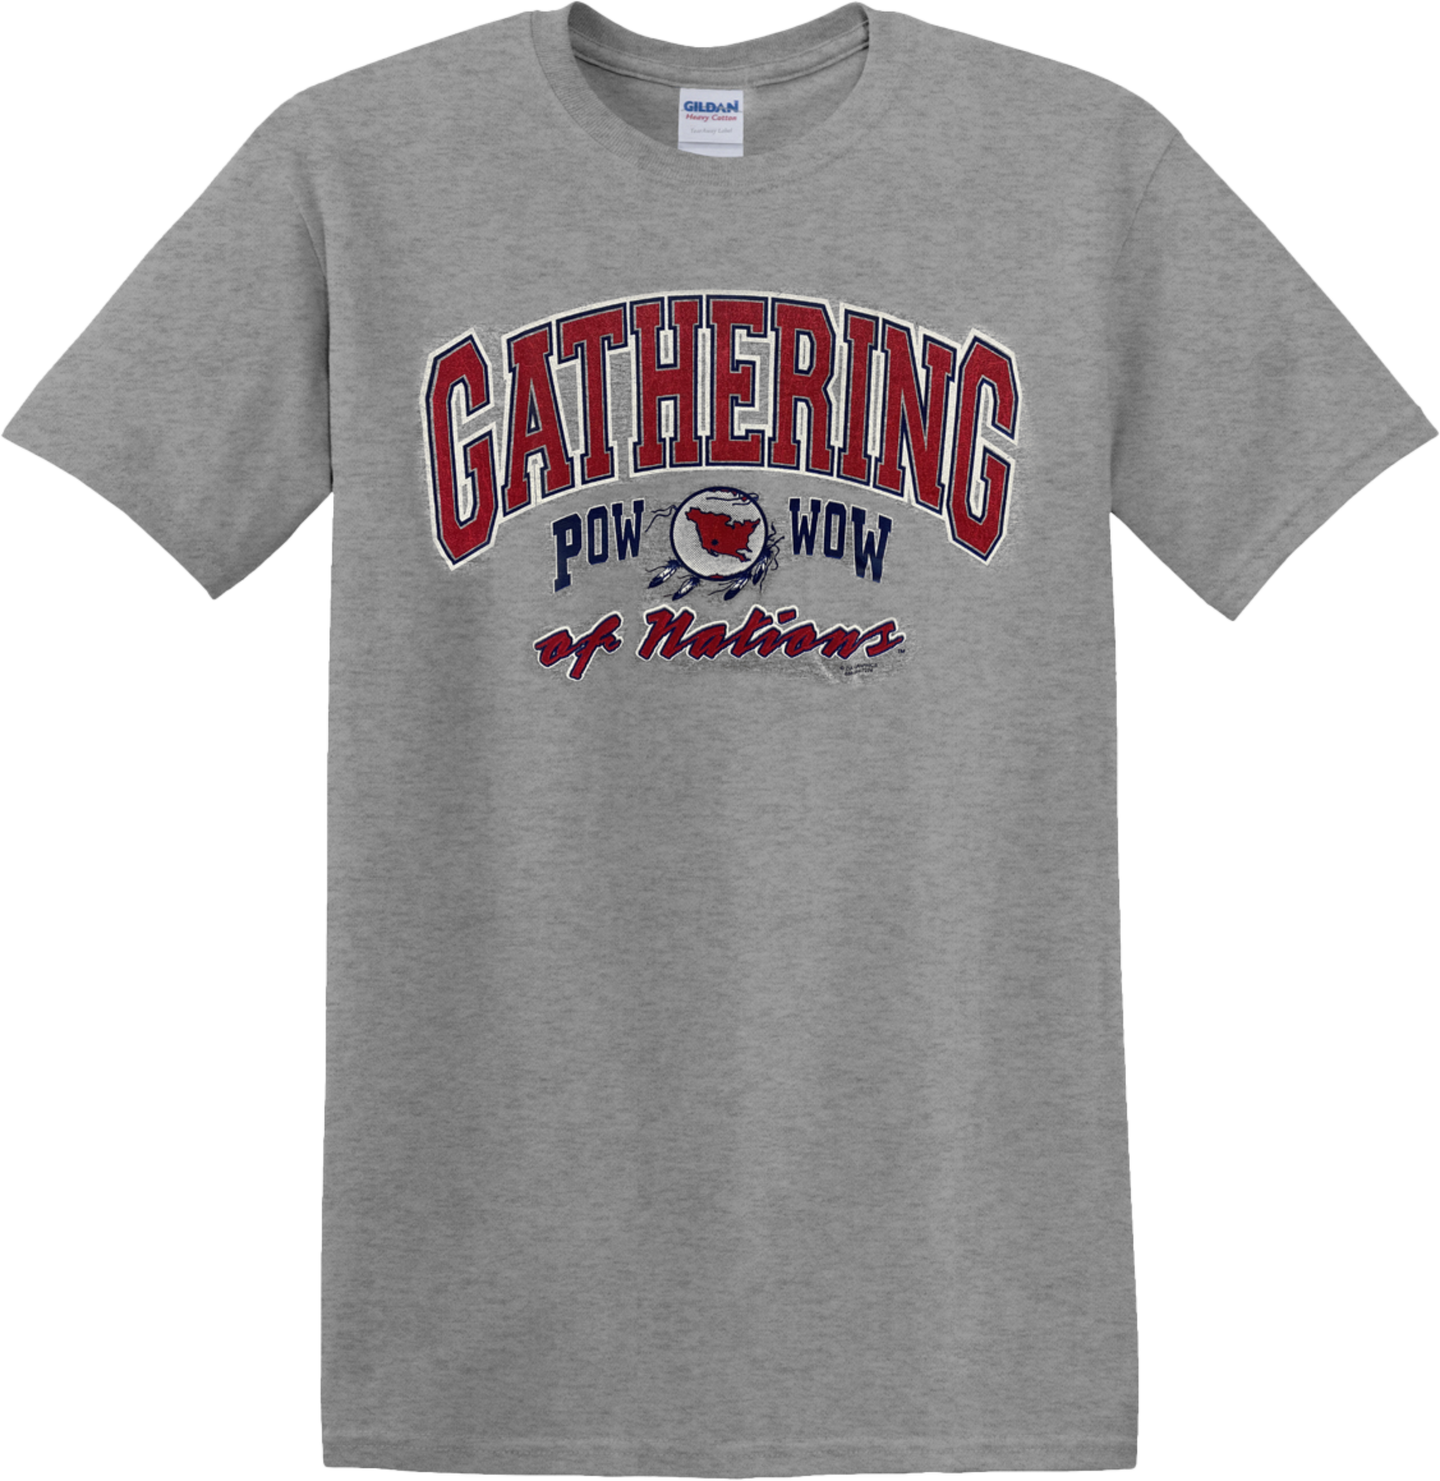 Gathering of Nations Pow Wow Gray T-Shirt